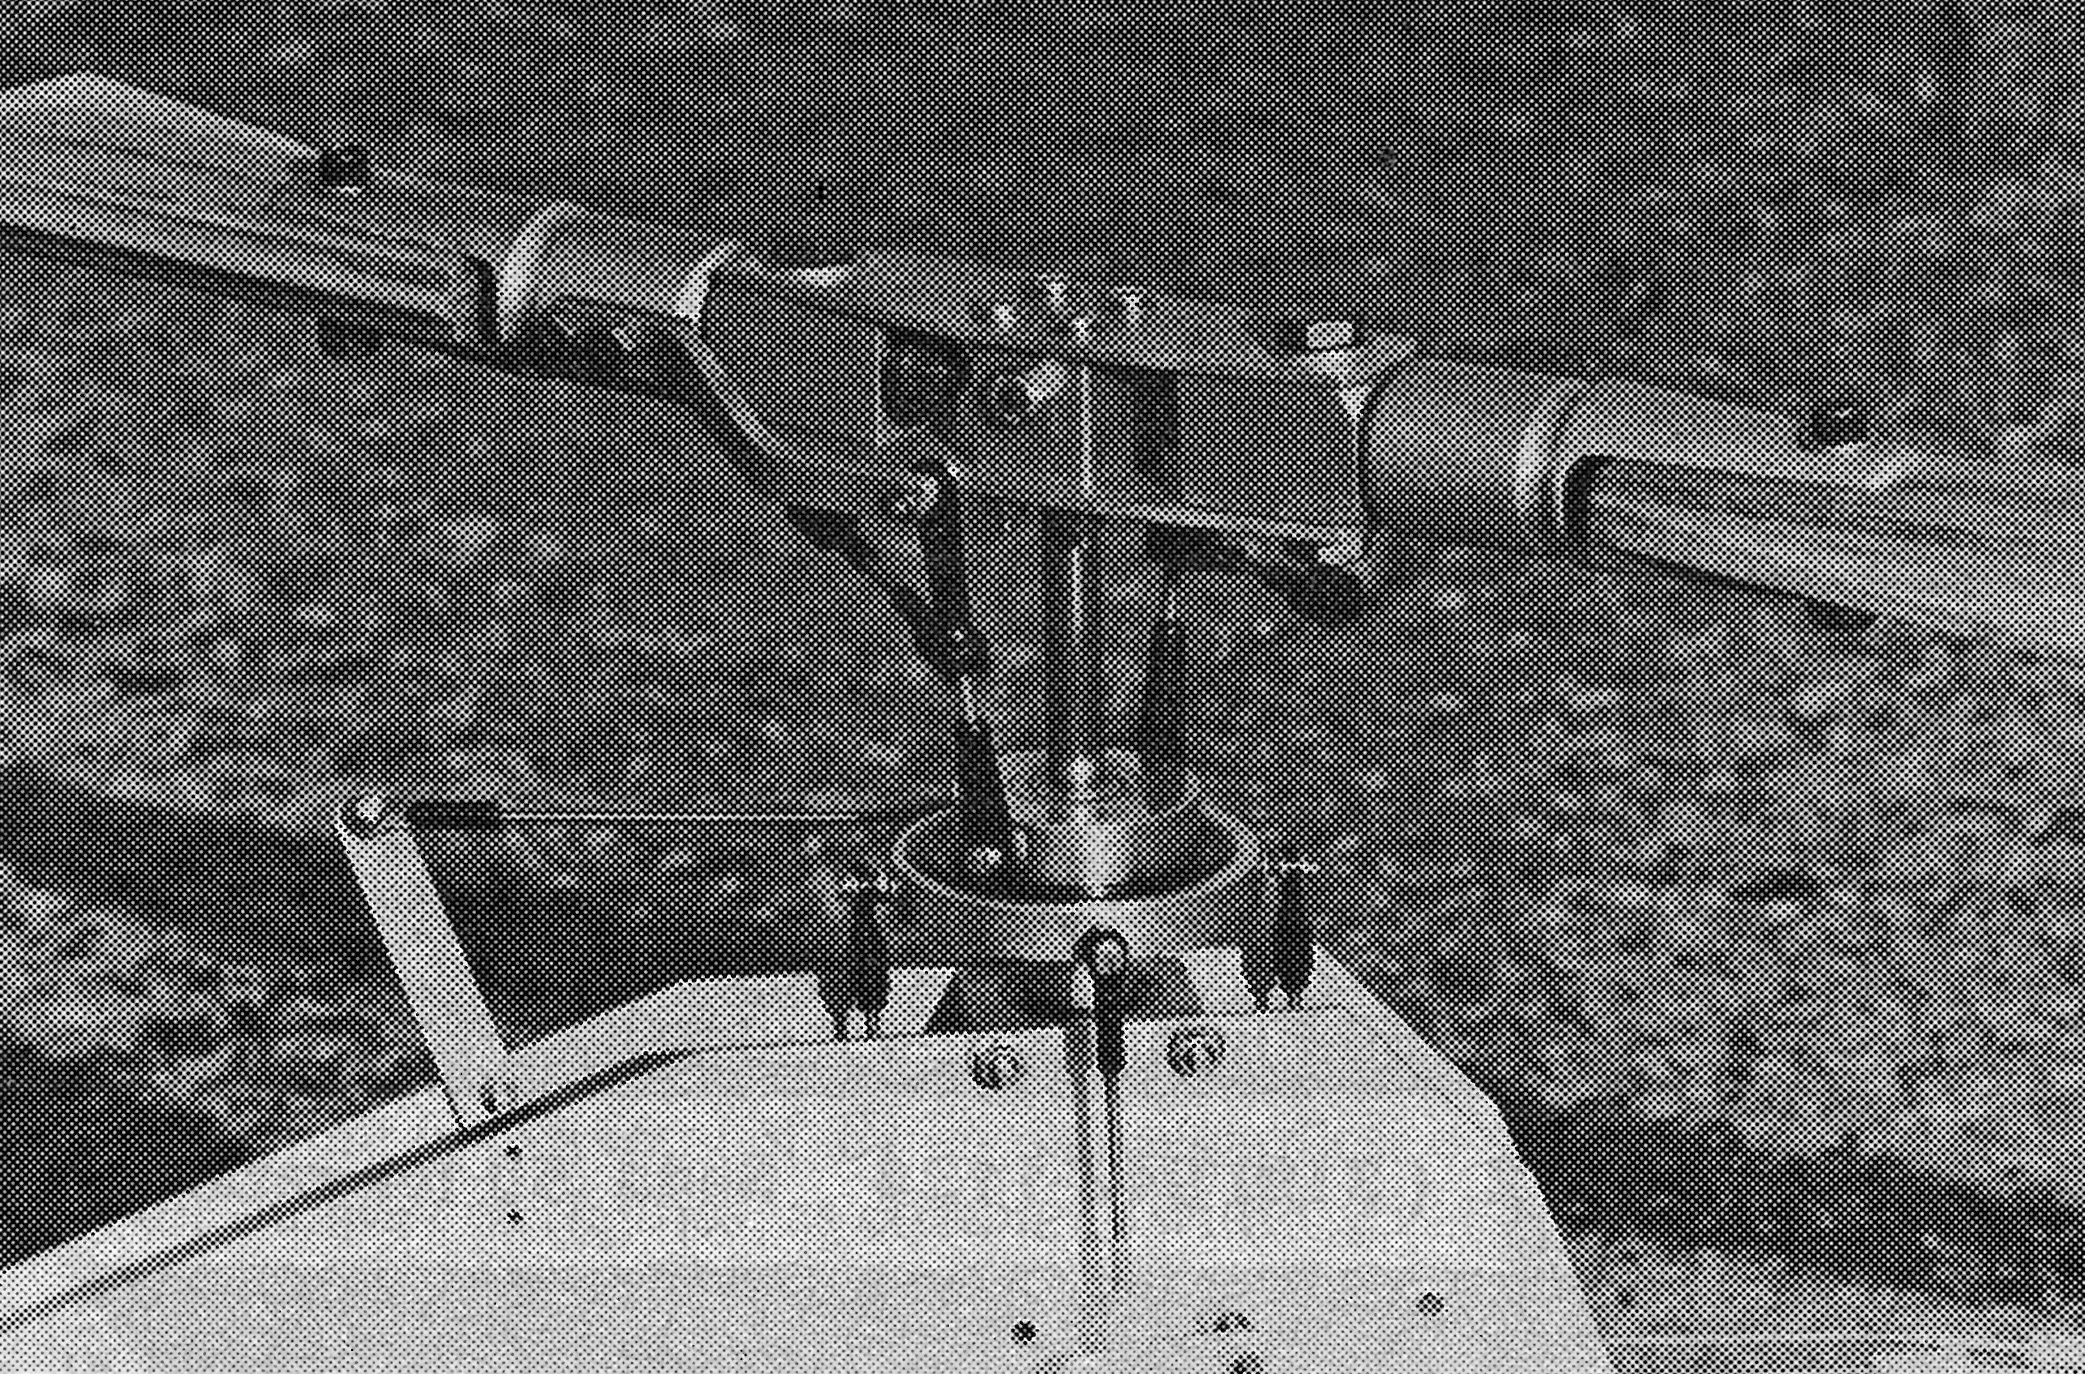 Photo at left, below, depicts the flybarless rigid rotor head. Simple and sturdy! Swashplate attaches to cyclic linkage at four points—minimizes slop. 